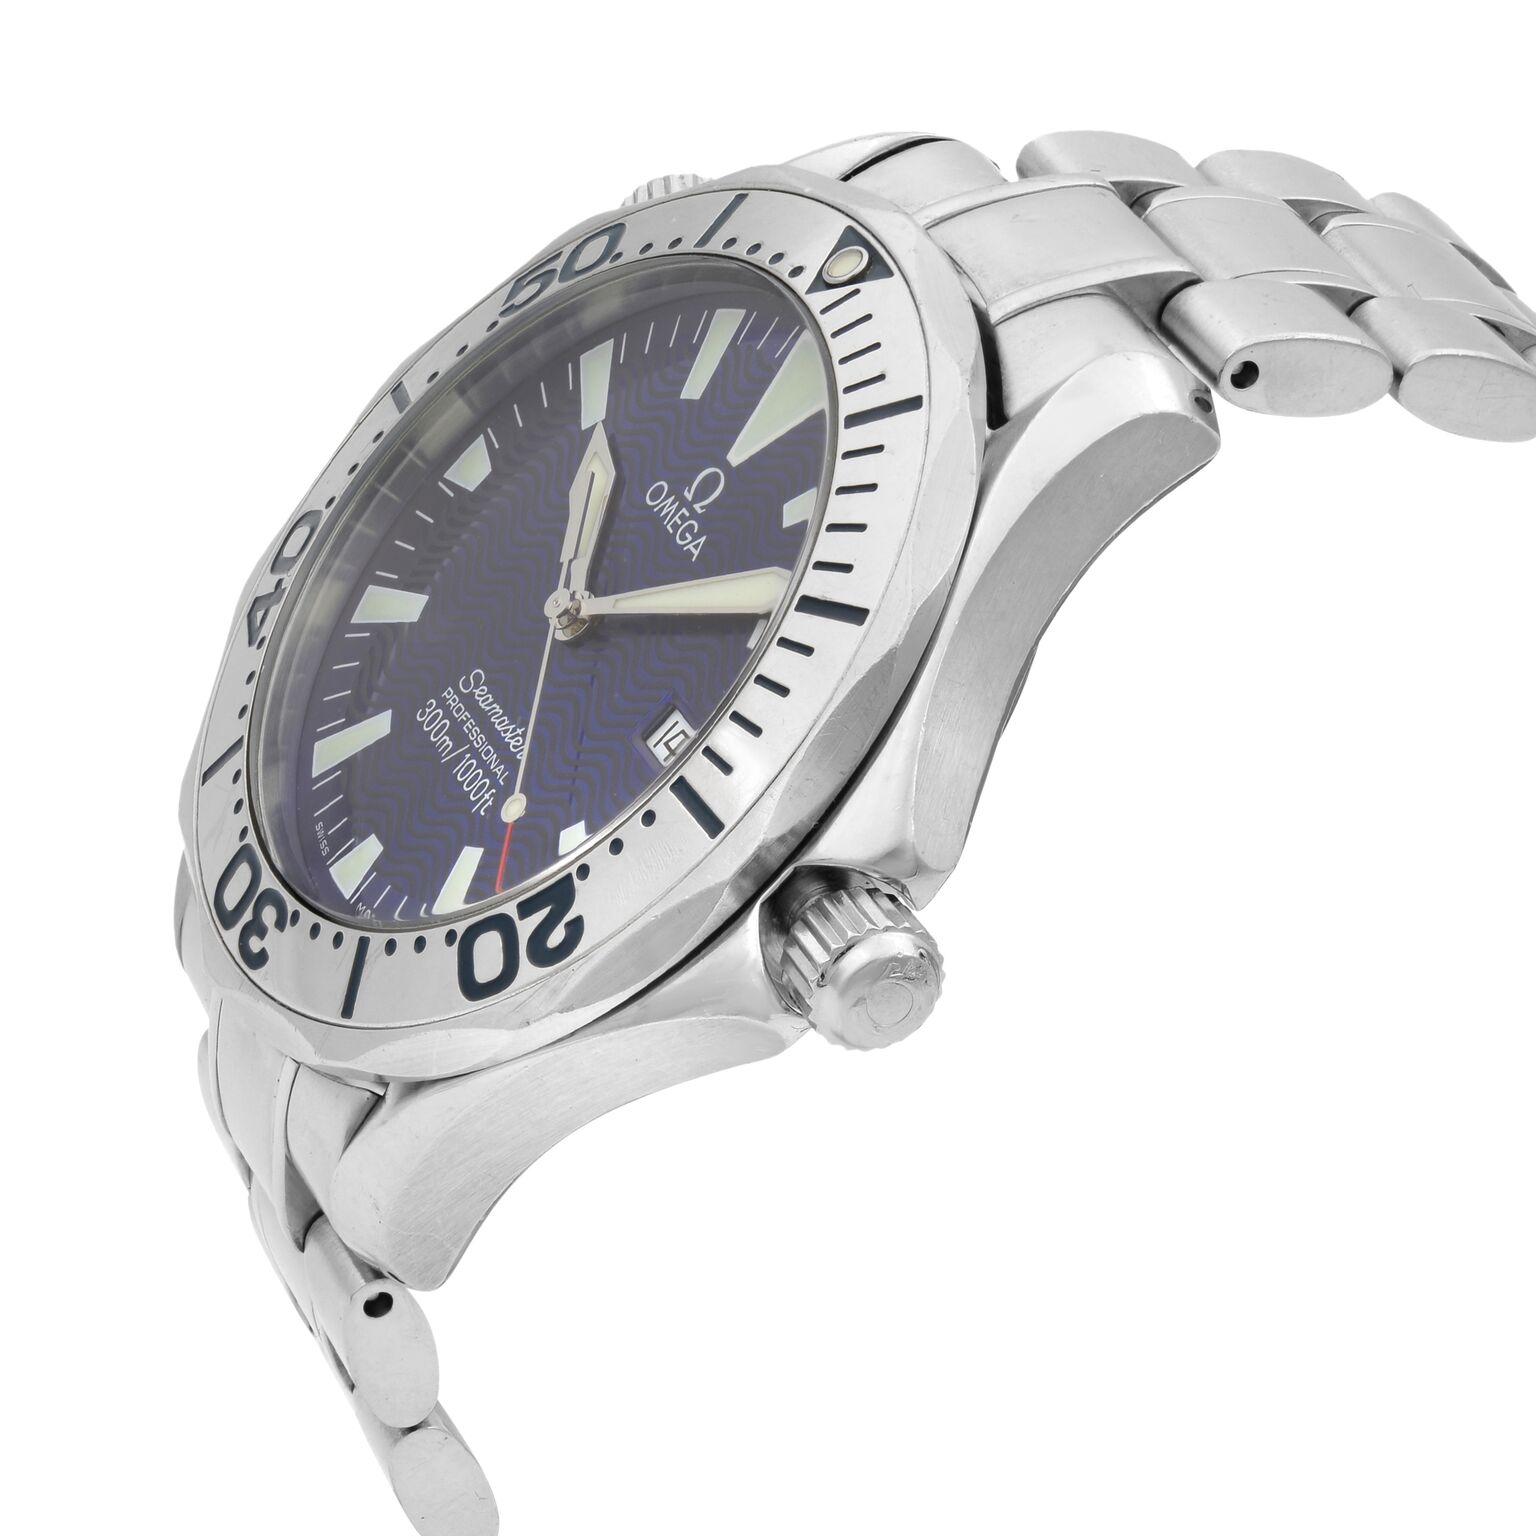 omega watch blue face